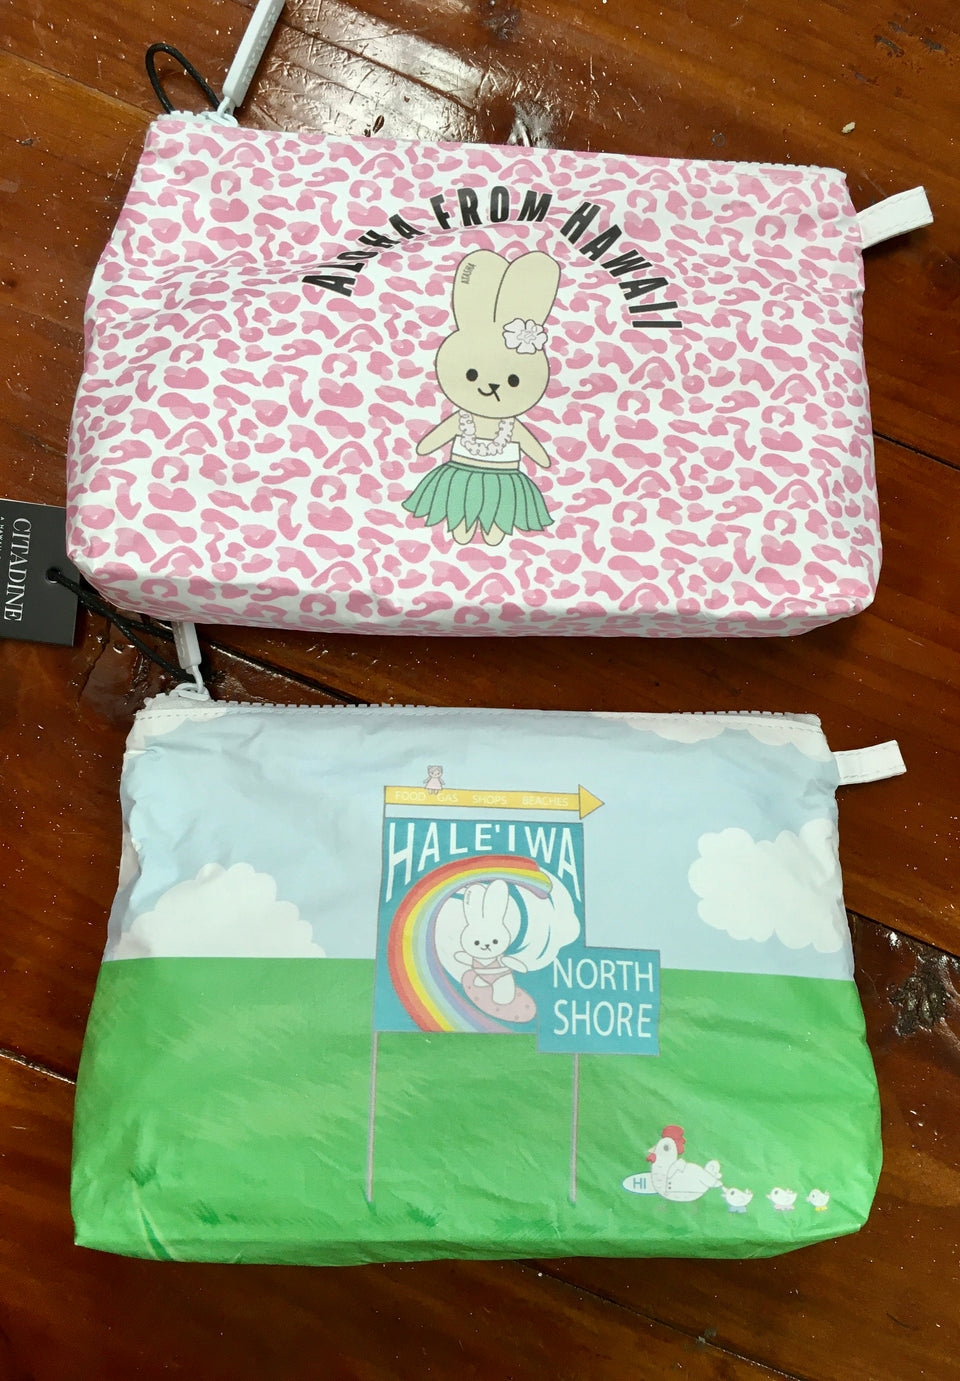 Pouch with bunny and hula skirt, second pouch with haleiwa sign and bunny